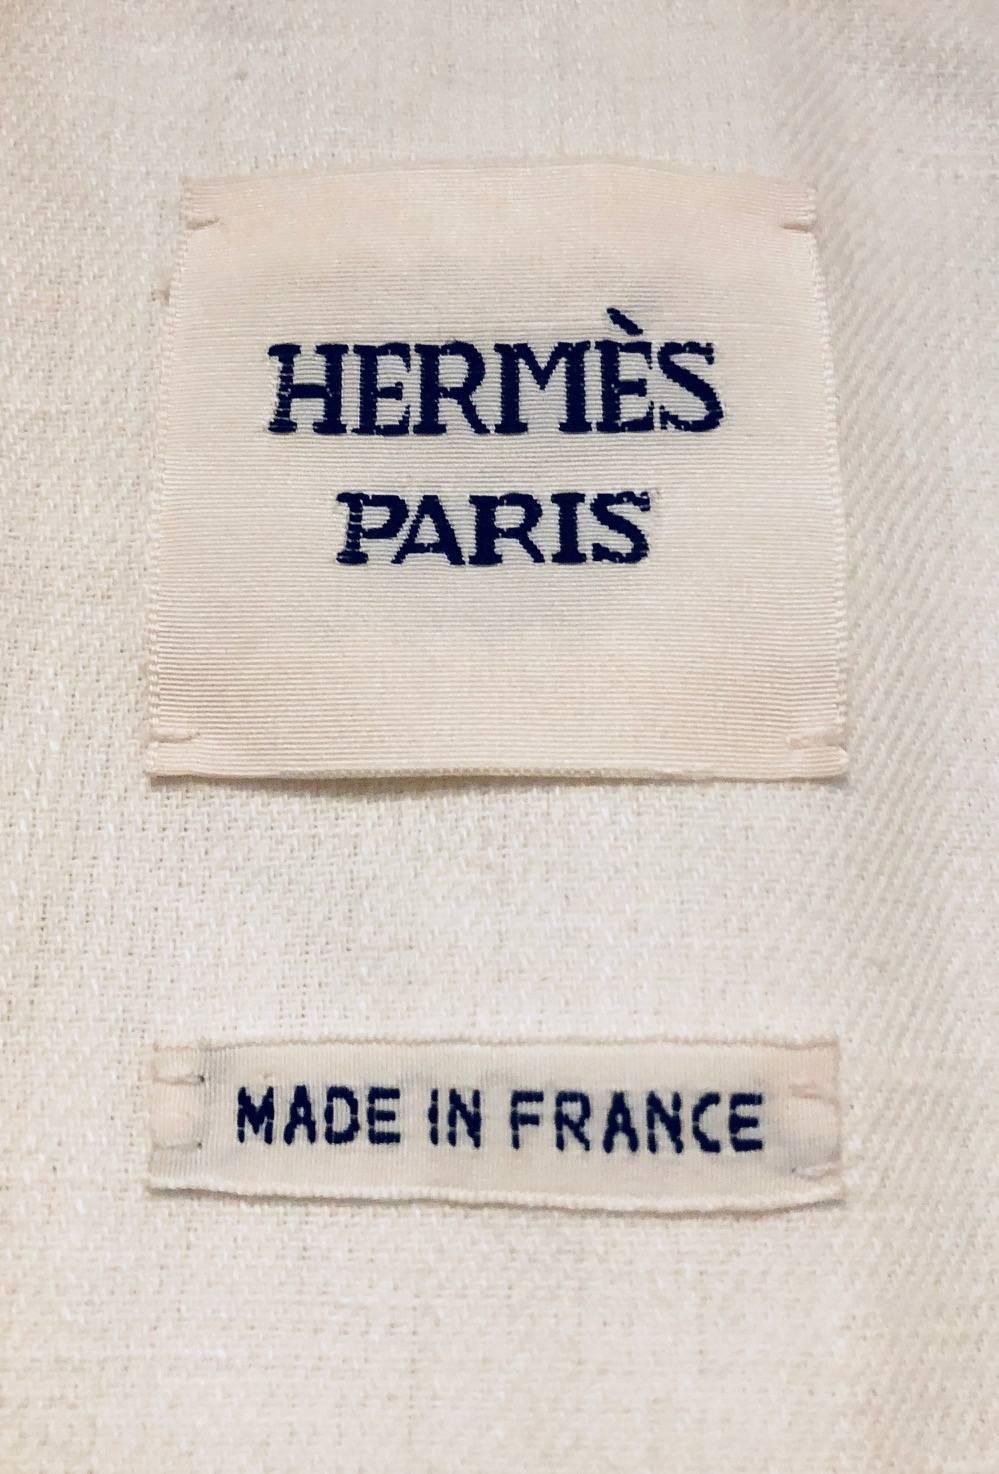 Hermes Ivory Linen Single Breasted Two Button Jacket 42 EU For Sale 1